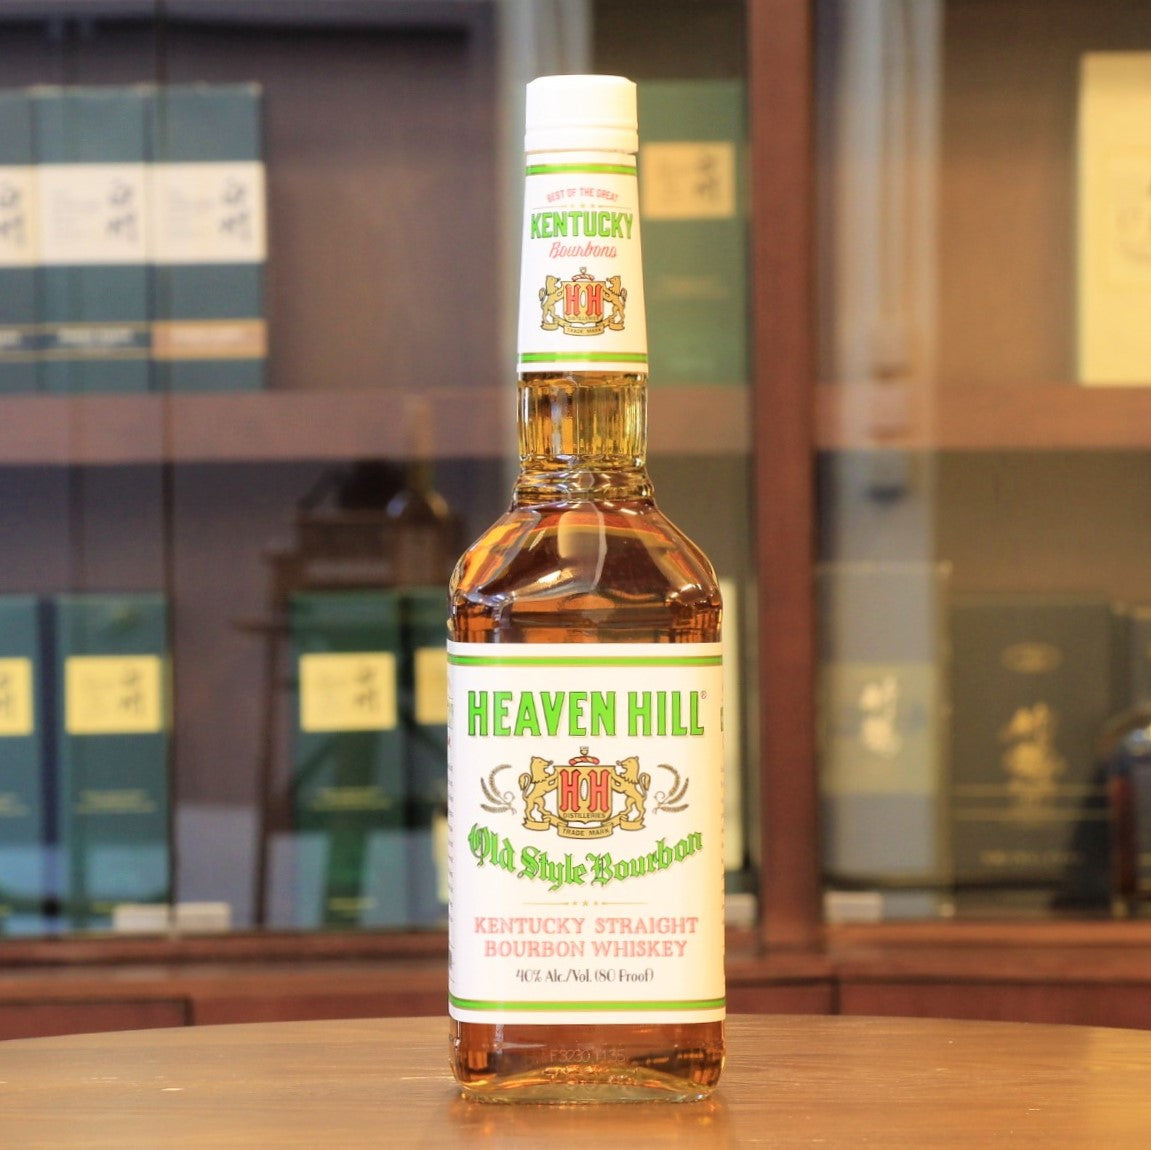 Region: Kentucky (USA)  Distillery: Heaven Hill Distillery  Age: Nas  ABV: 40%  Size: 750 ml  This bourbon whikey is flagship product from Heaven Hill Old style Bourbon, which named for the spring around the distillery grounds. Aged in oak barrel and Charcoal filtered before bottled. 